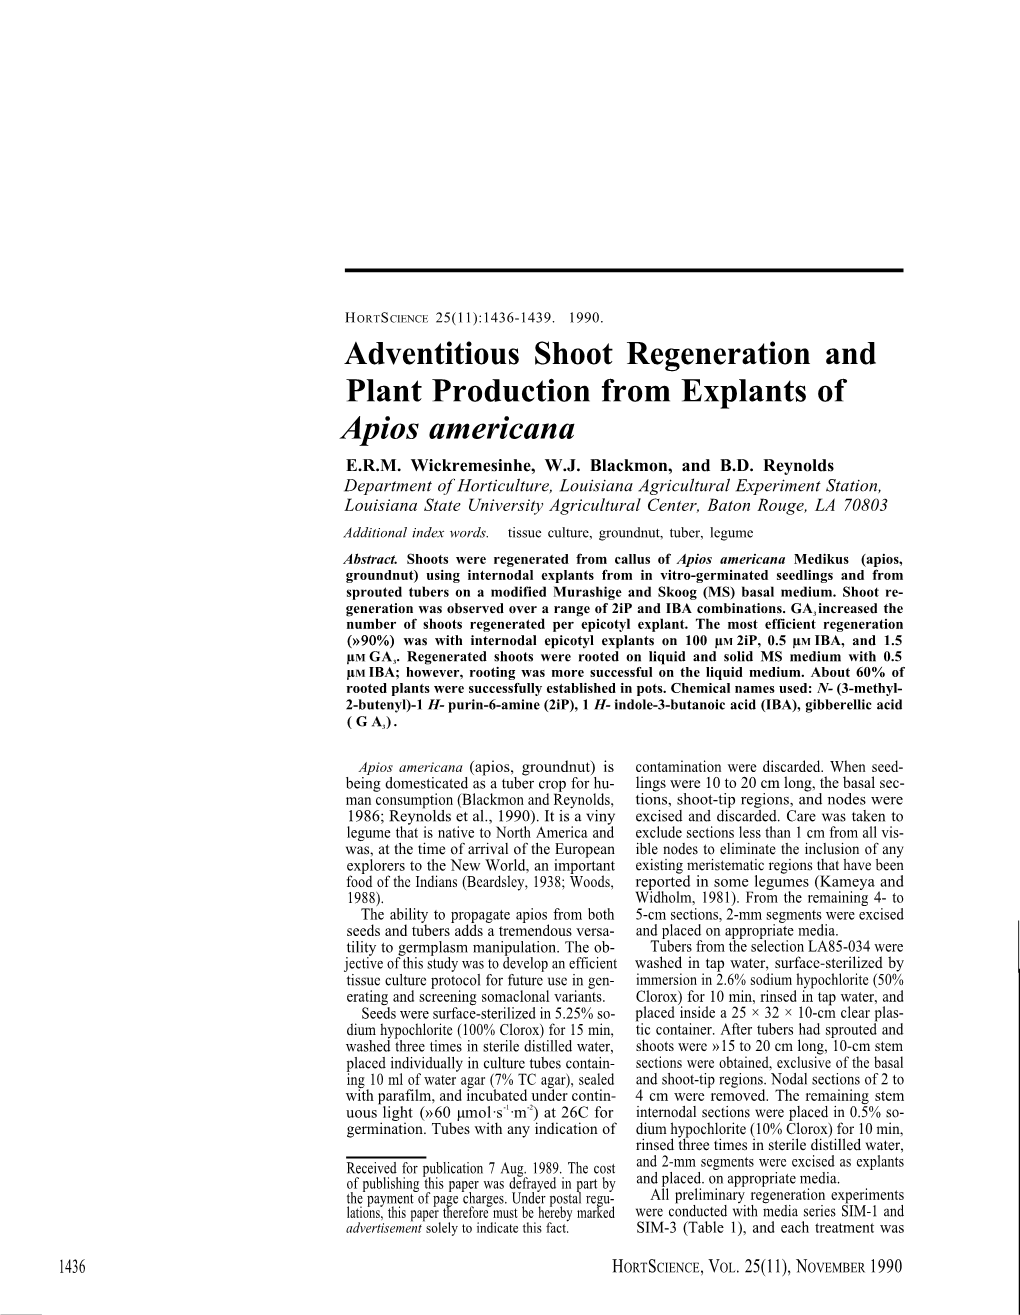 "Adventitious Shoot Regeneration and Plant Production from Explants Of